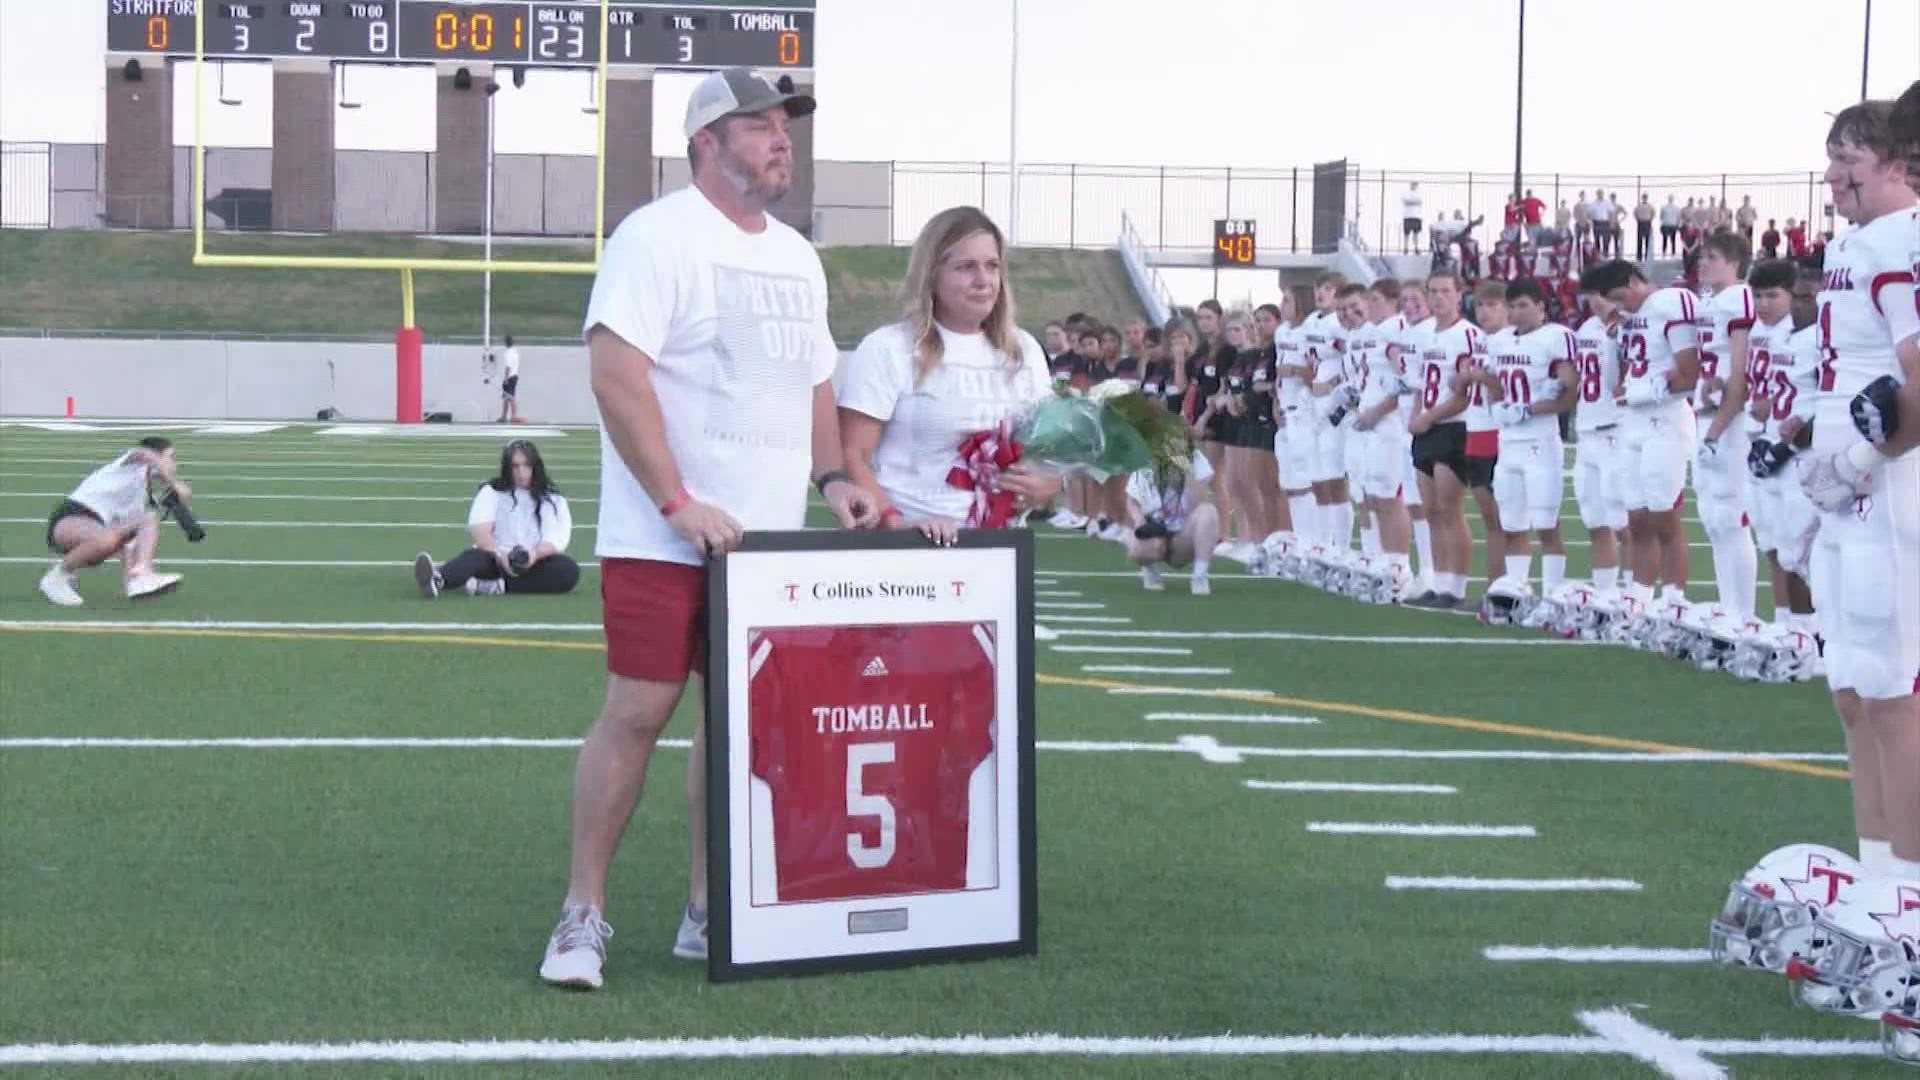 The school honored Carson Collins' family by presenting his parents with a jersey. Carson was one of five killed by escaped inmate Gonzalo Lopez.